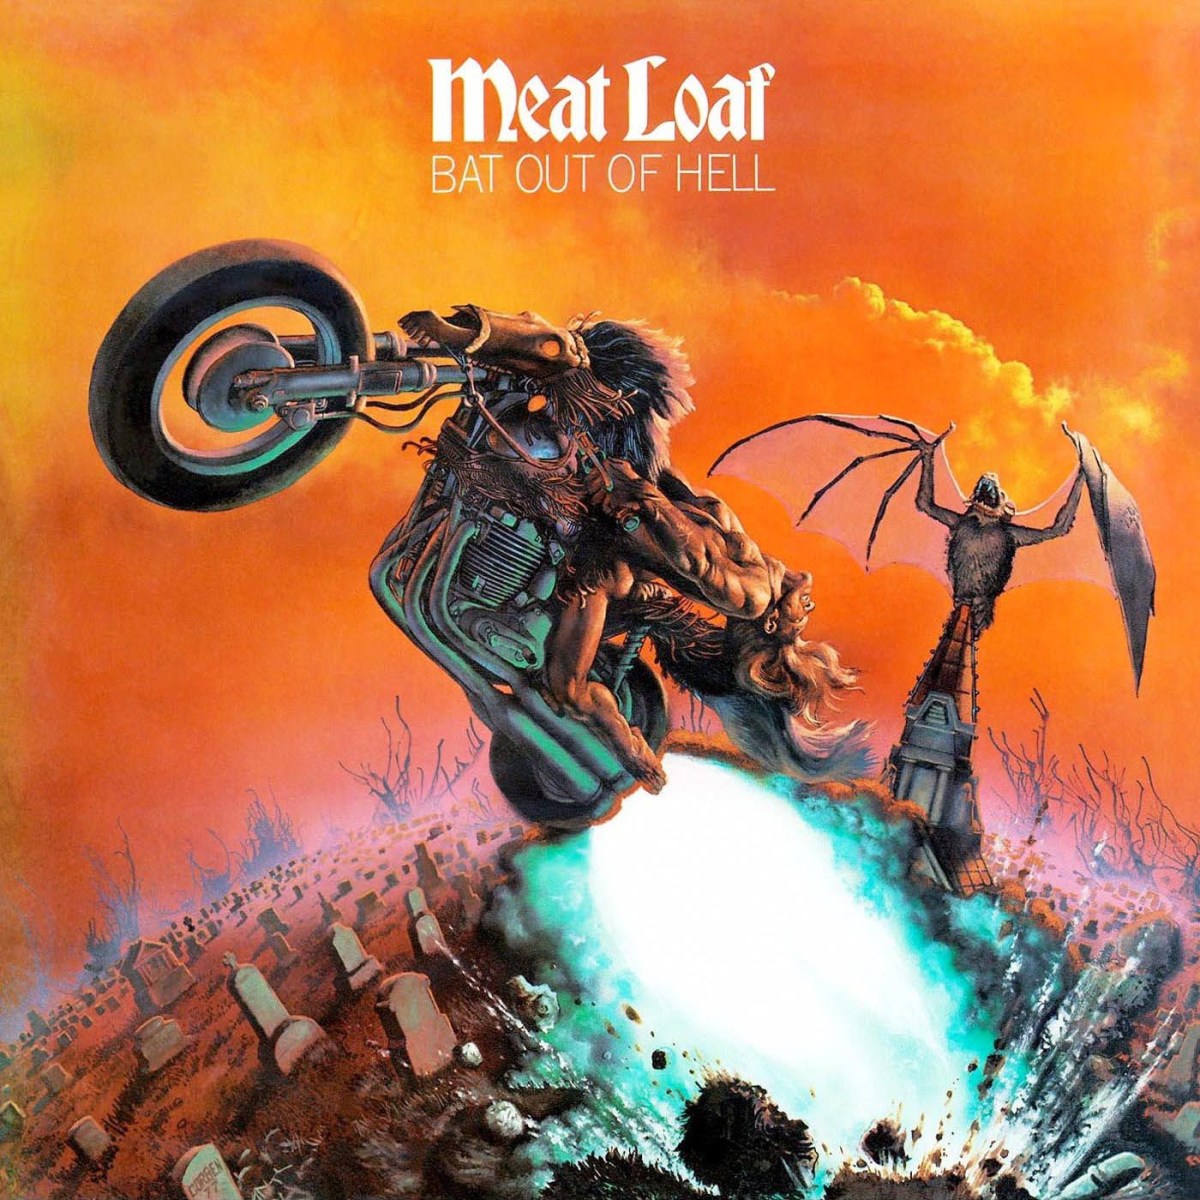 Meat Loaf Bat Out of Hell 1977 Richard Corben